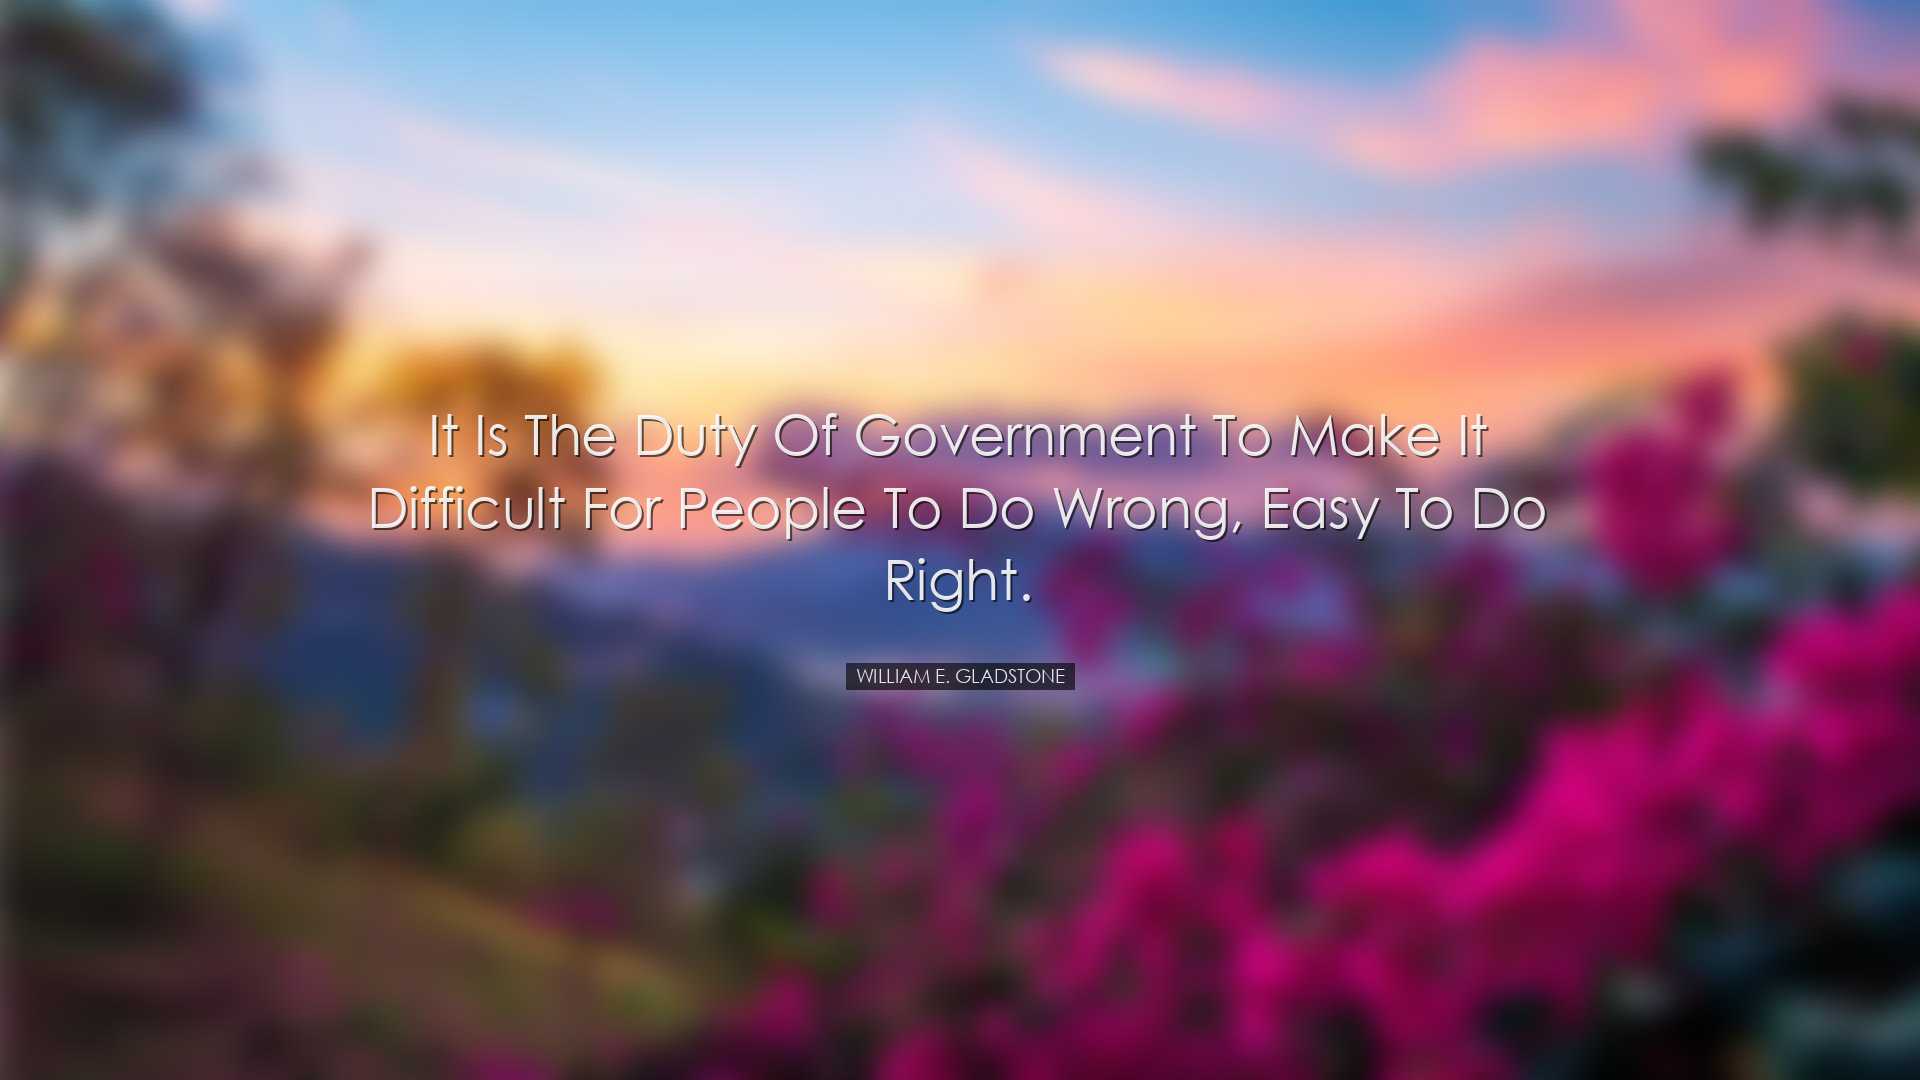 It is the duty of government to make it difficult for people to do